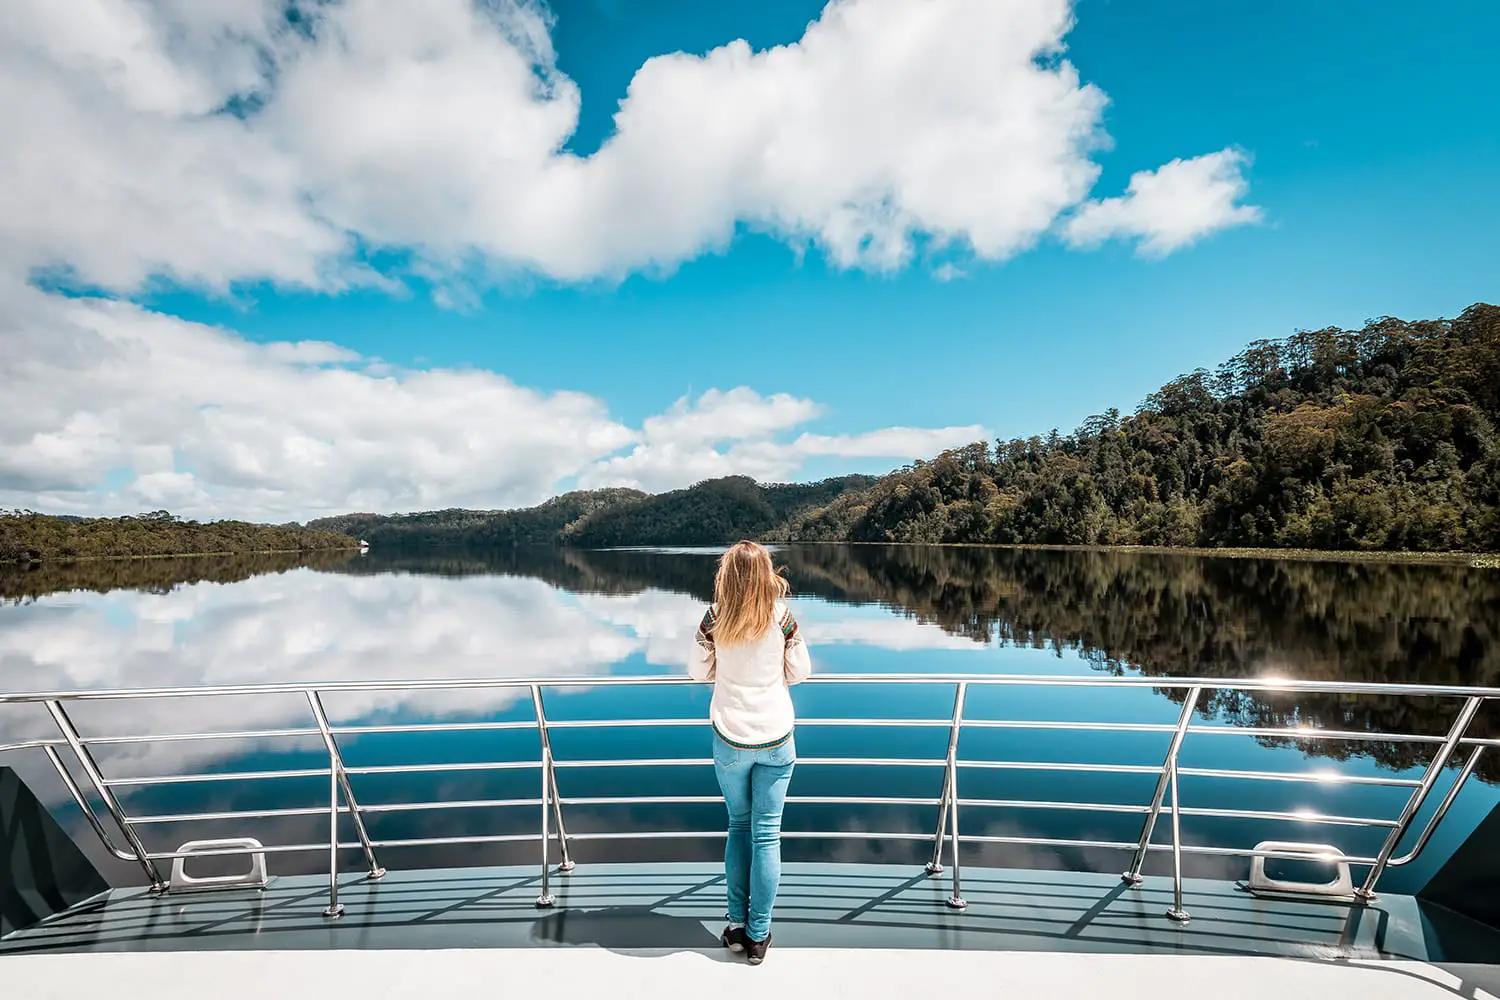 Woman stands by the railing of a ship and looks at the mirror-like water, surrounded by wilderness, sunny blue sky, Gordon River, Tasmania, Australia